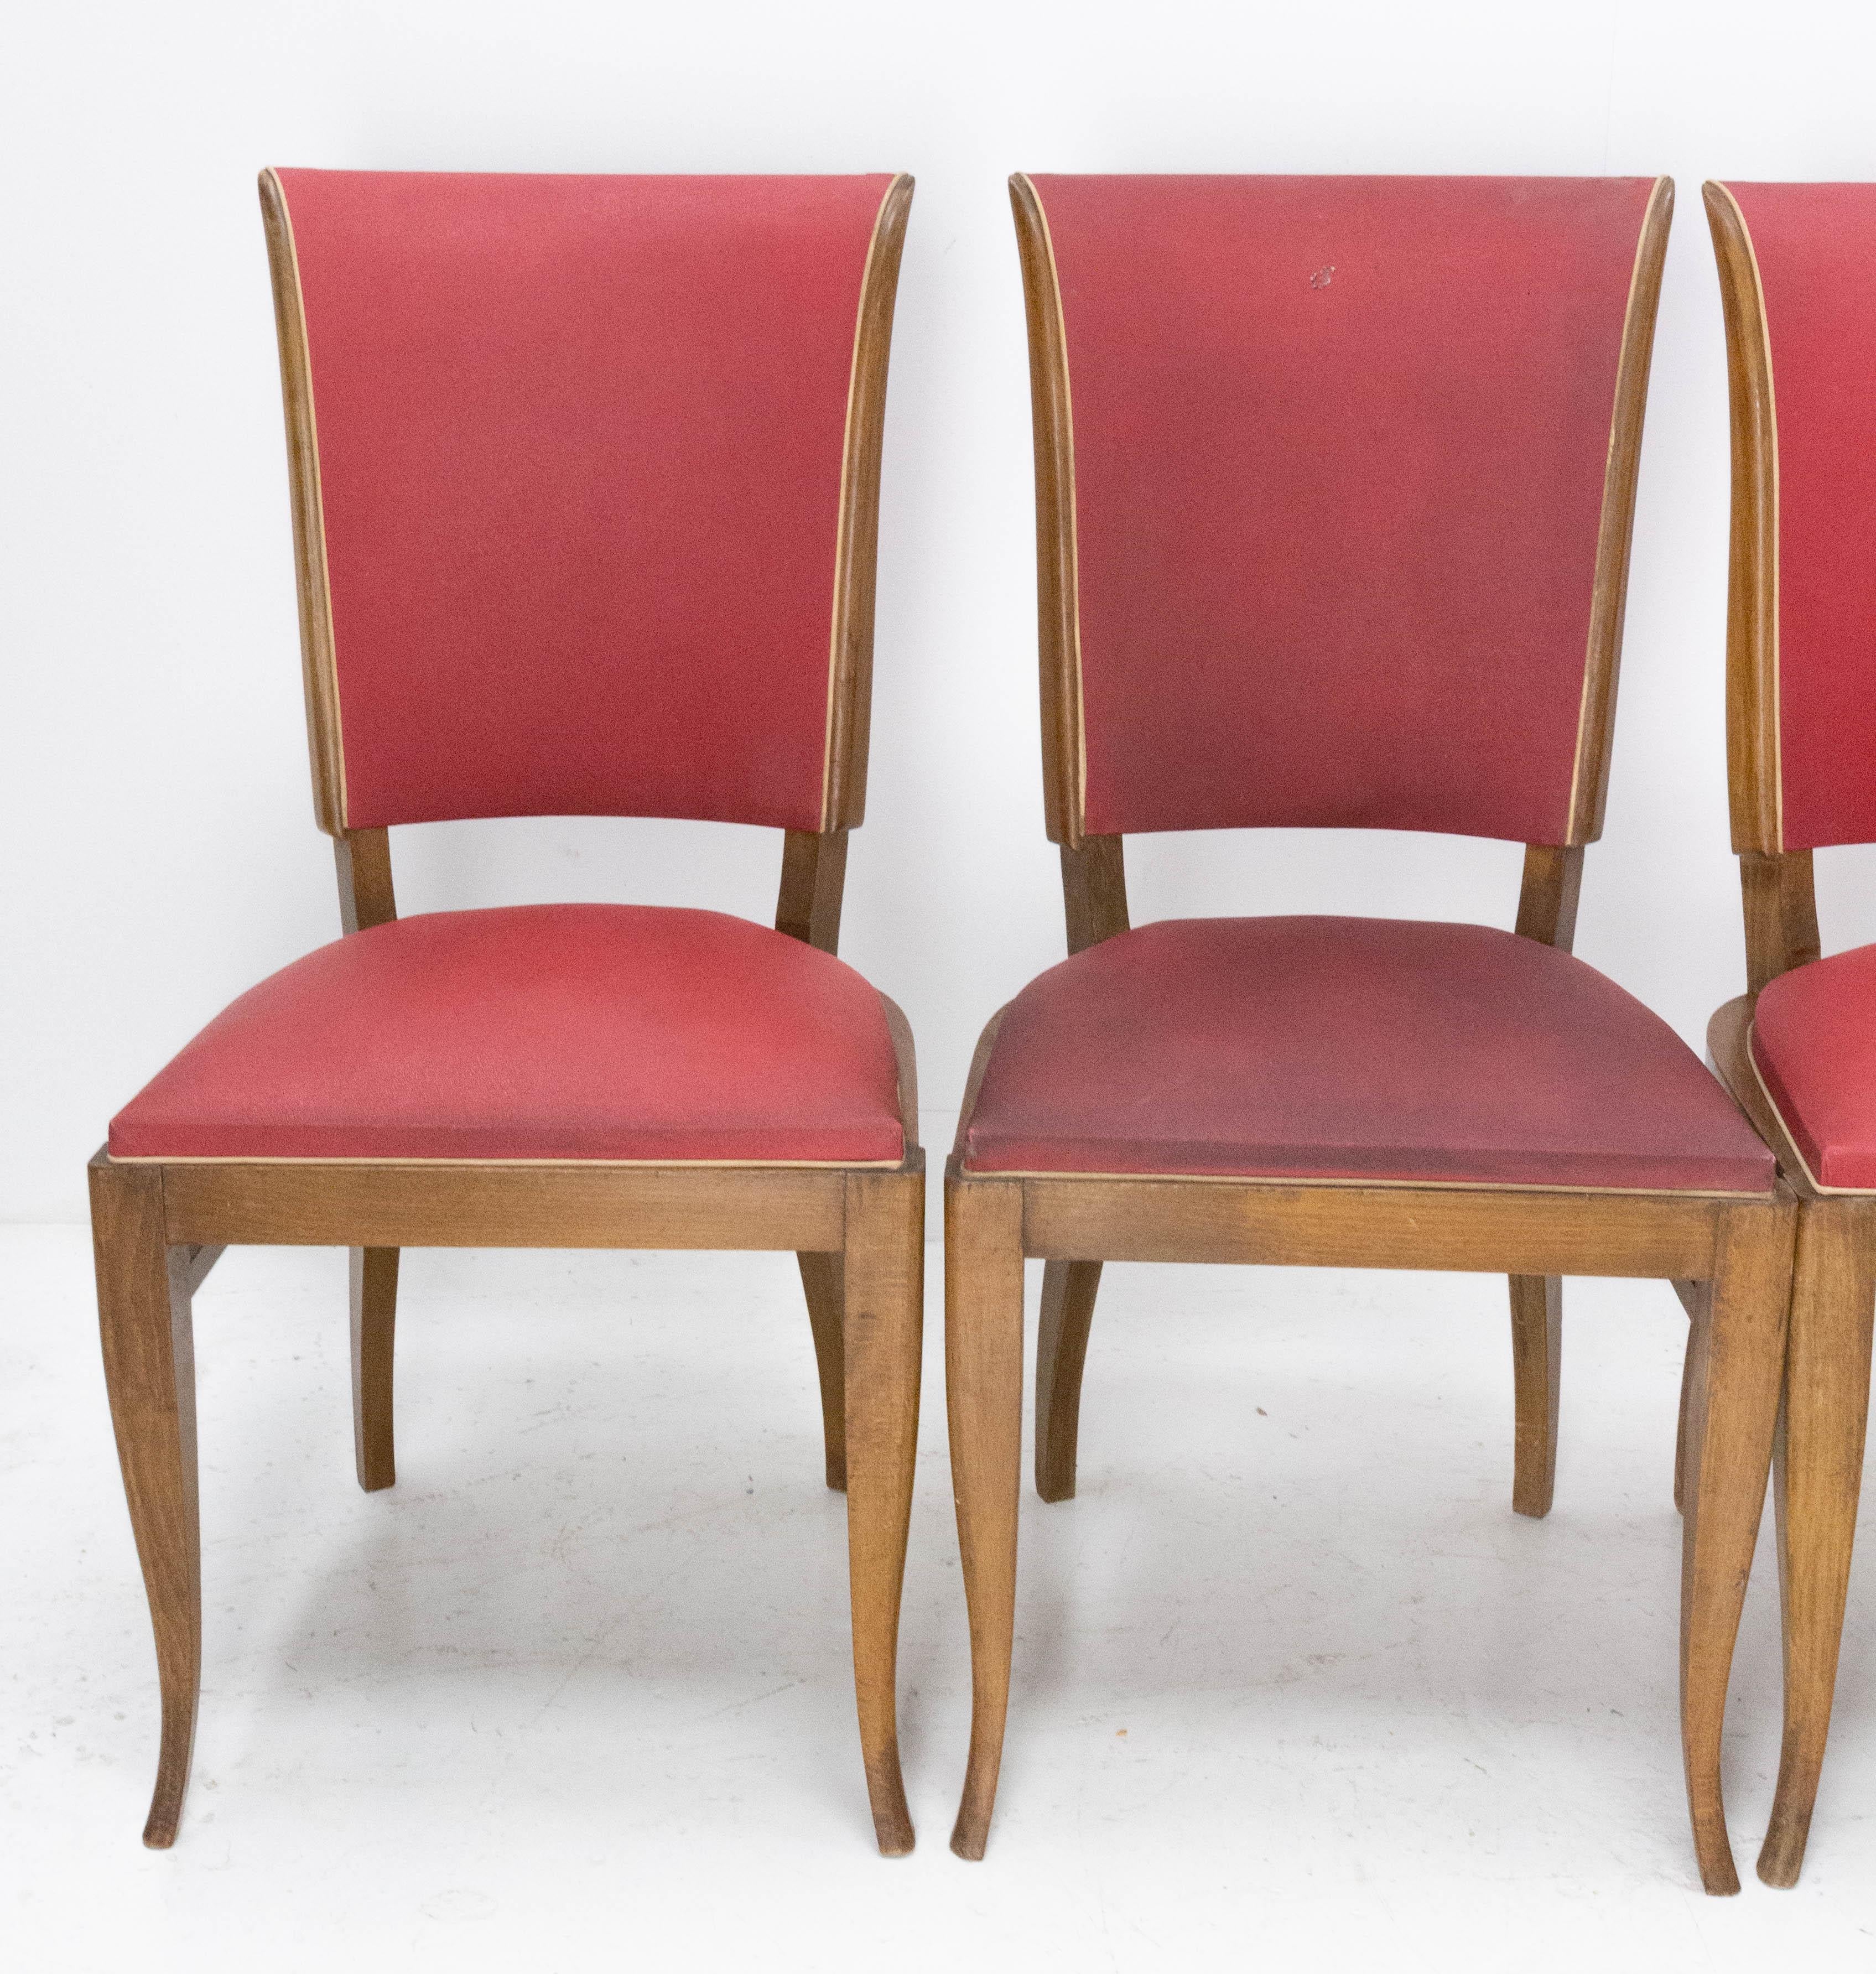 Four Vintage Beech Dining Chairs to be Re-upholstered, French, circa 1950 For Sale 2